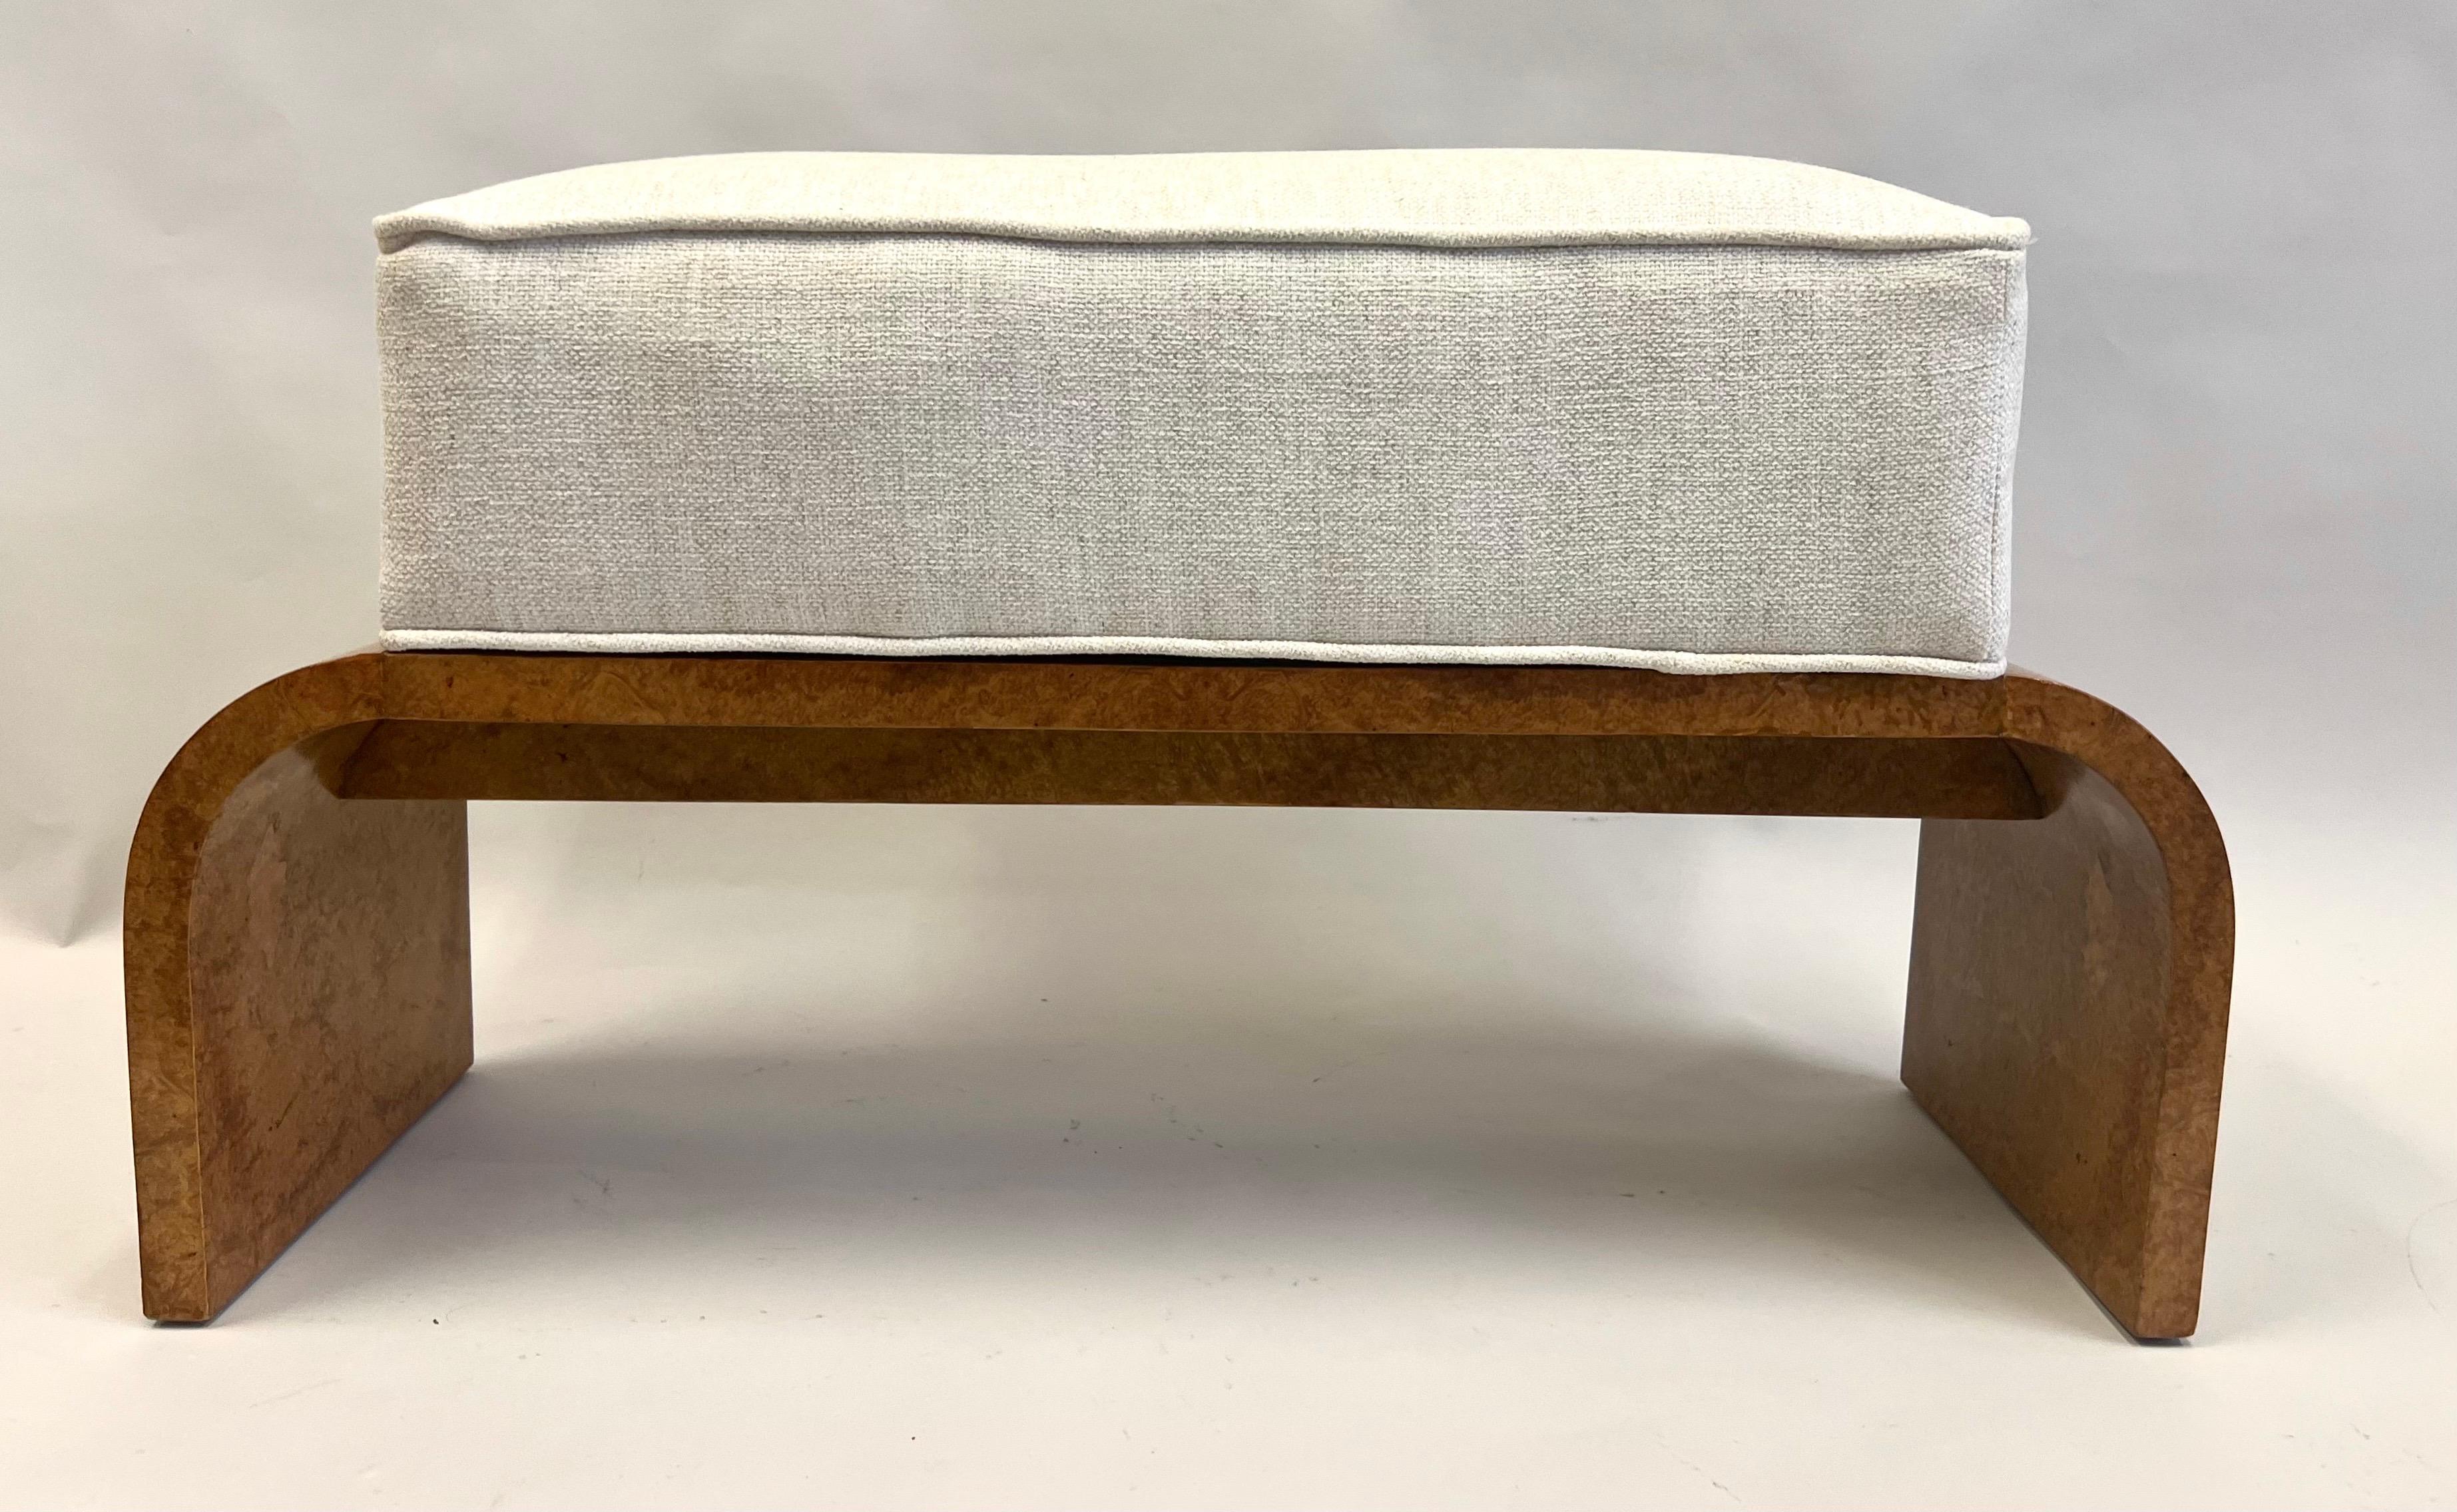 A Rare and Exquisite French Art Deco Bench in Burled Walnut in a sleek, modern U Shaped, 'Waterfall